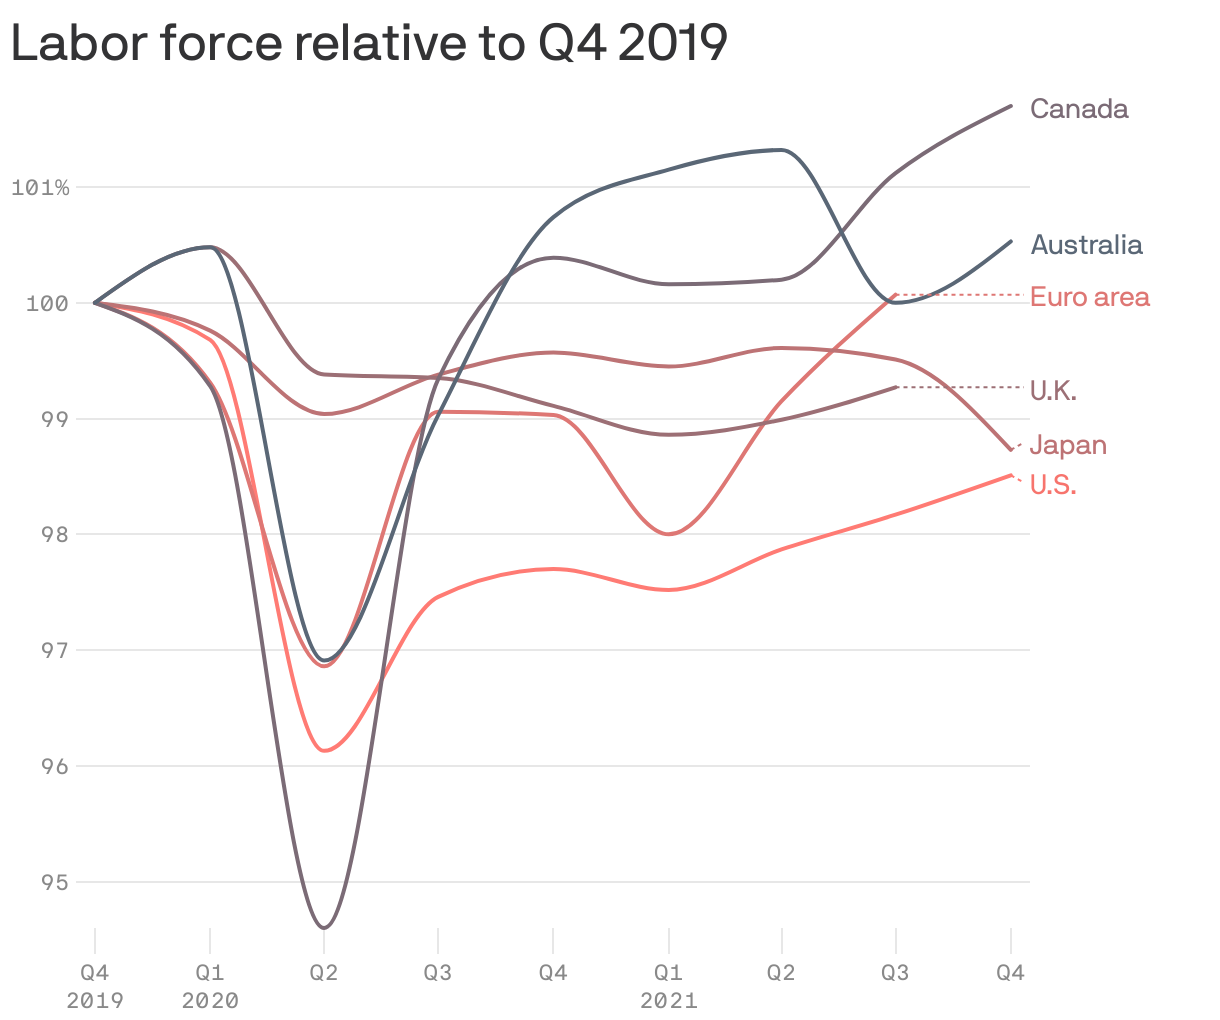 Labor force relative to Q4 2019